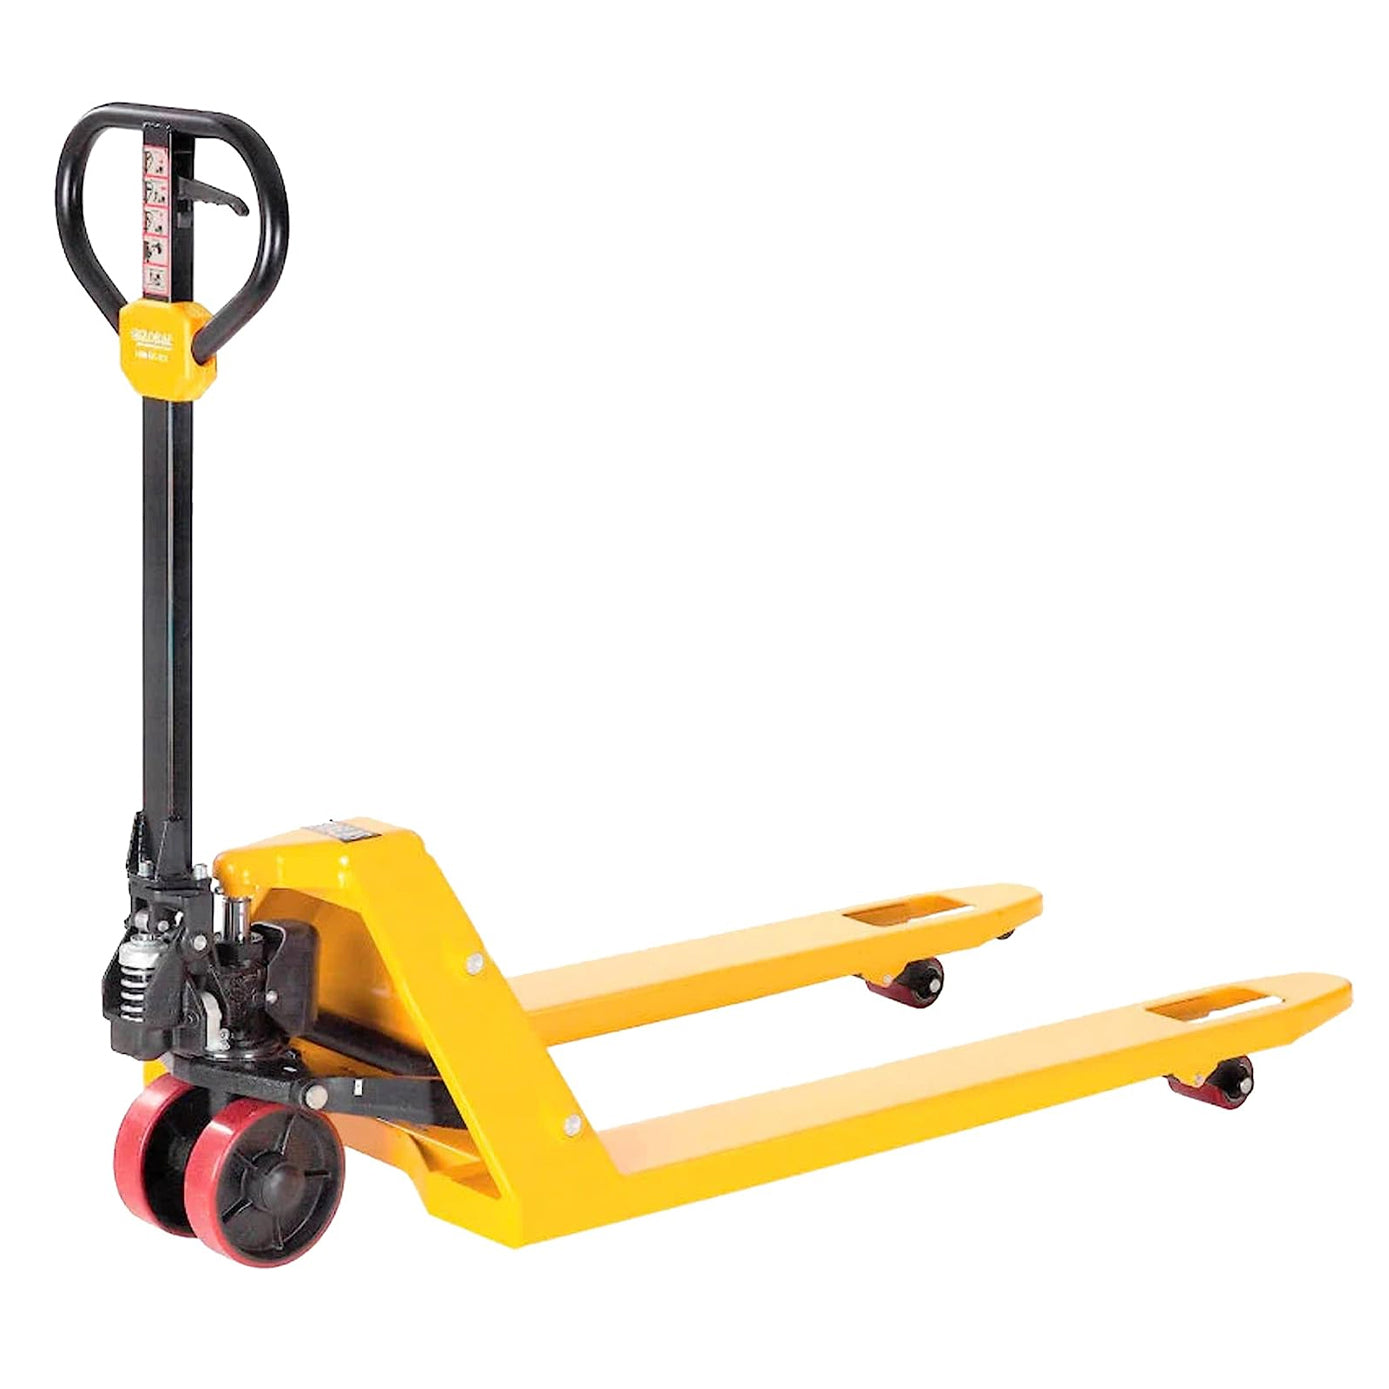 5Seconds Steel Hand Pallet Truck, 5500 lbs Capacity, 48 inch Length x 21 inch Width Fork, Yellow